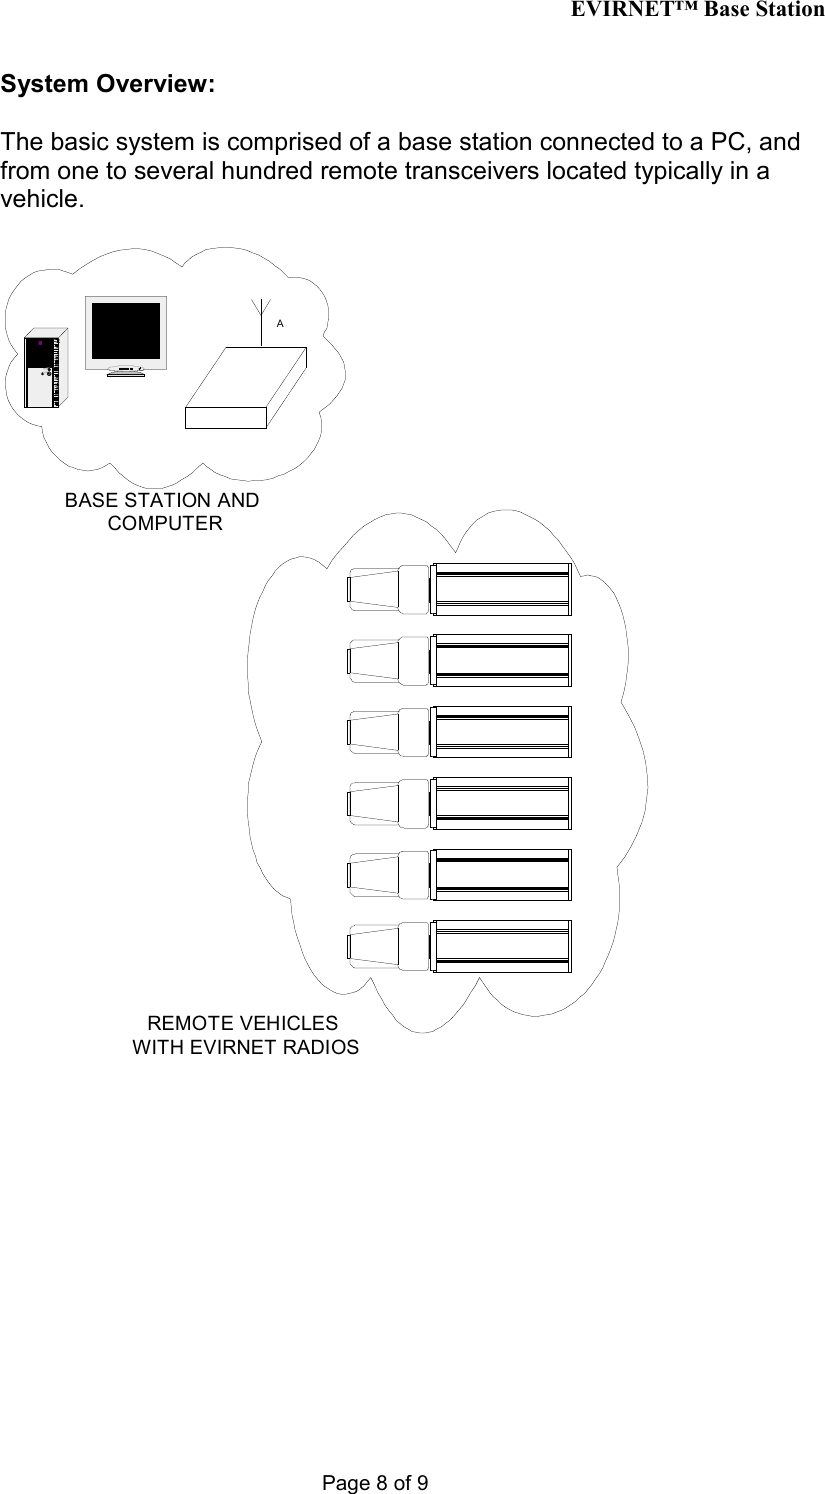 EVIRNET™ Base Station Page 8 of 9 System Overview:  The basic system is comprised of a base station connected to a PC, and from one to several hundred remote transceivers located typically in a vehicle.  ABASE STATION AND COMPUTERREMOTE VEHICLES WITH EVIRNET RADIOS 